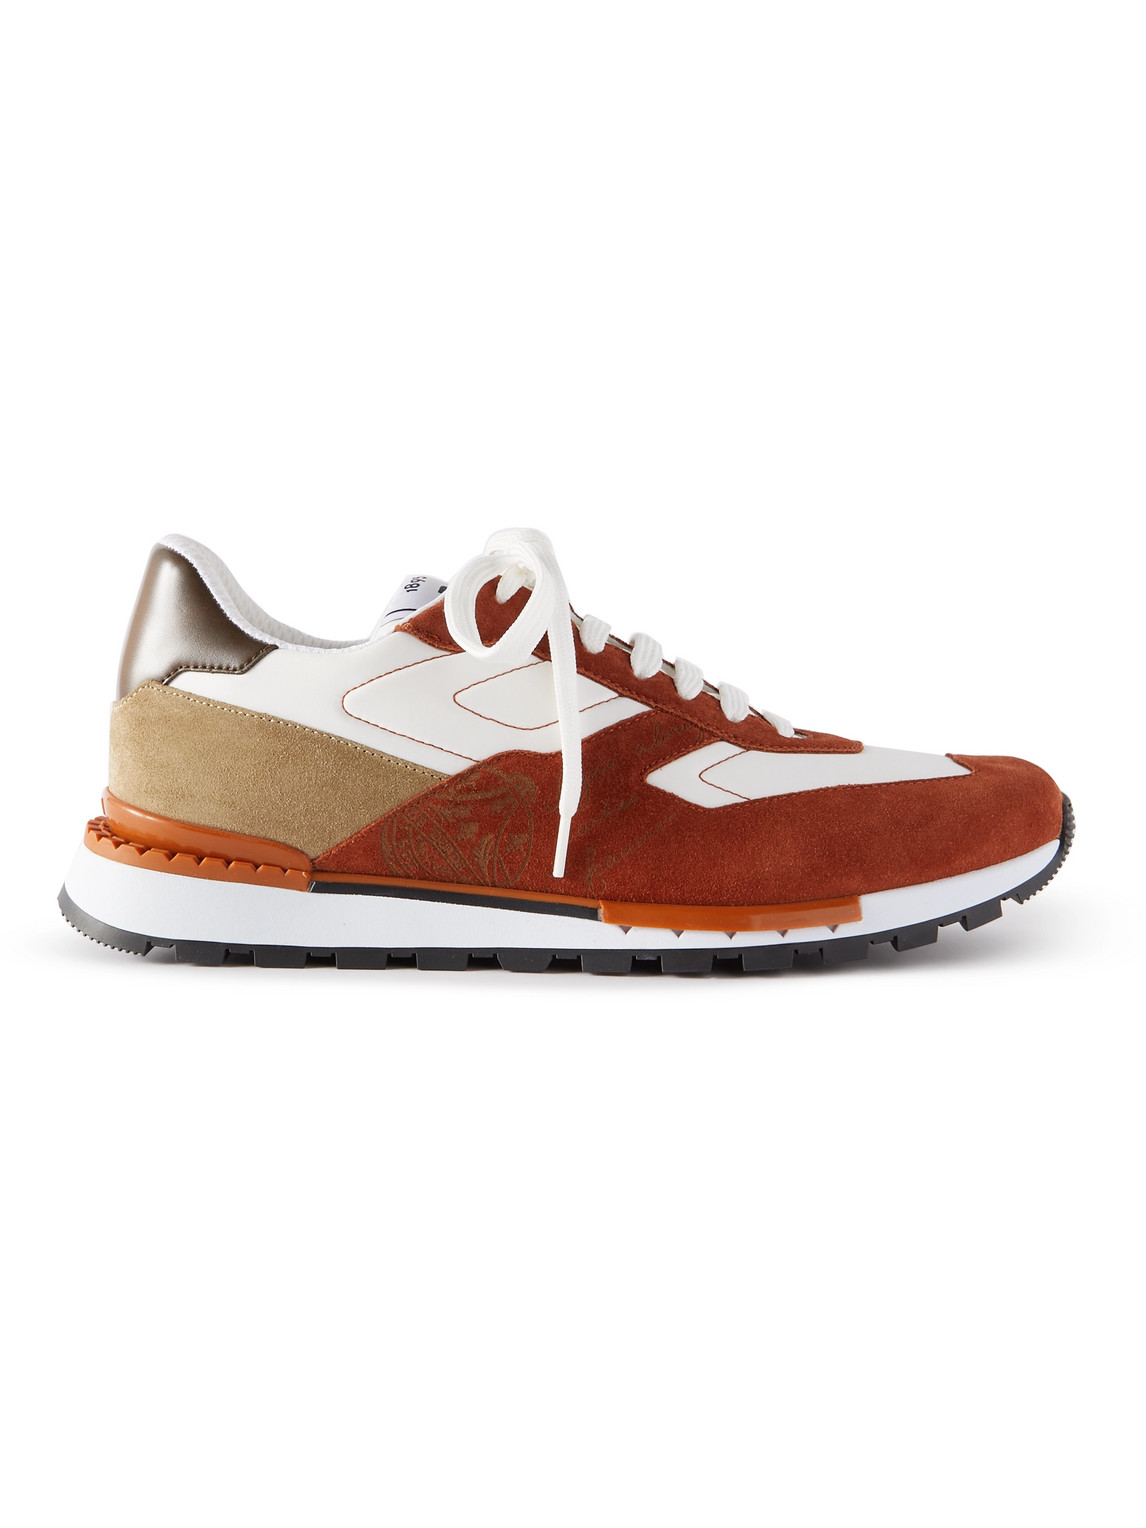 BERLUTI TORINO SUEDE, SHELL AND LEATHER SNEAKERS